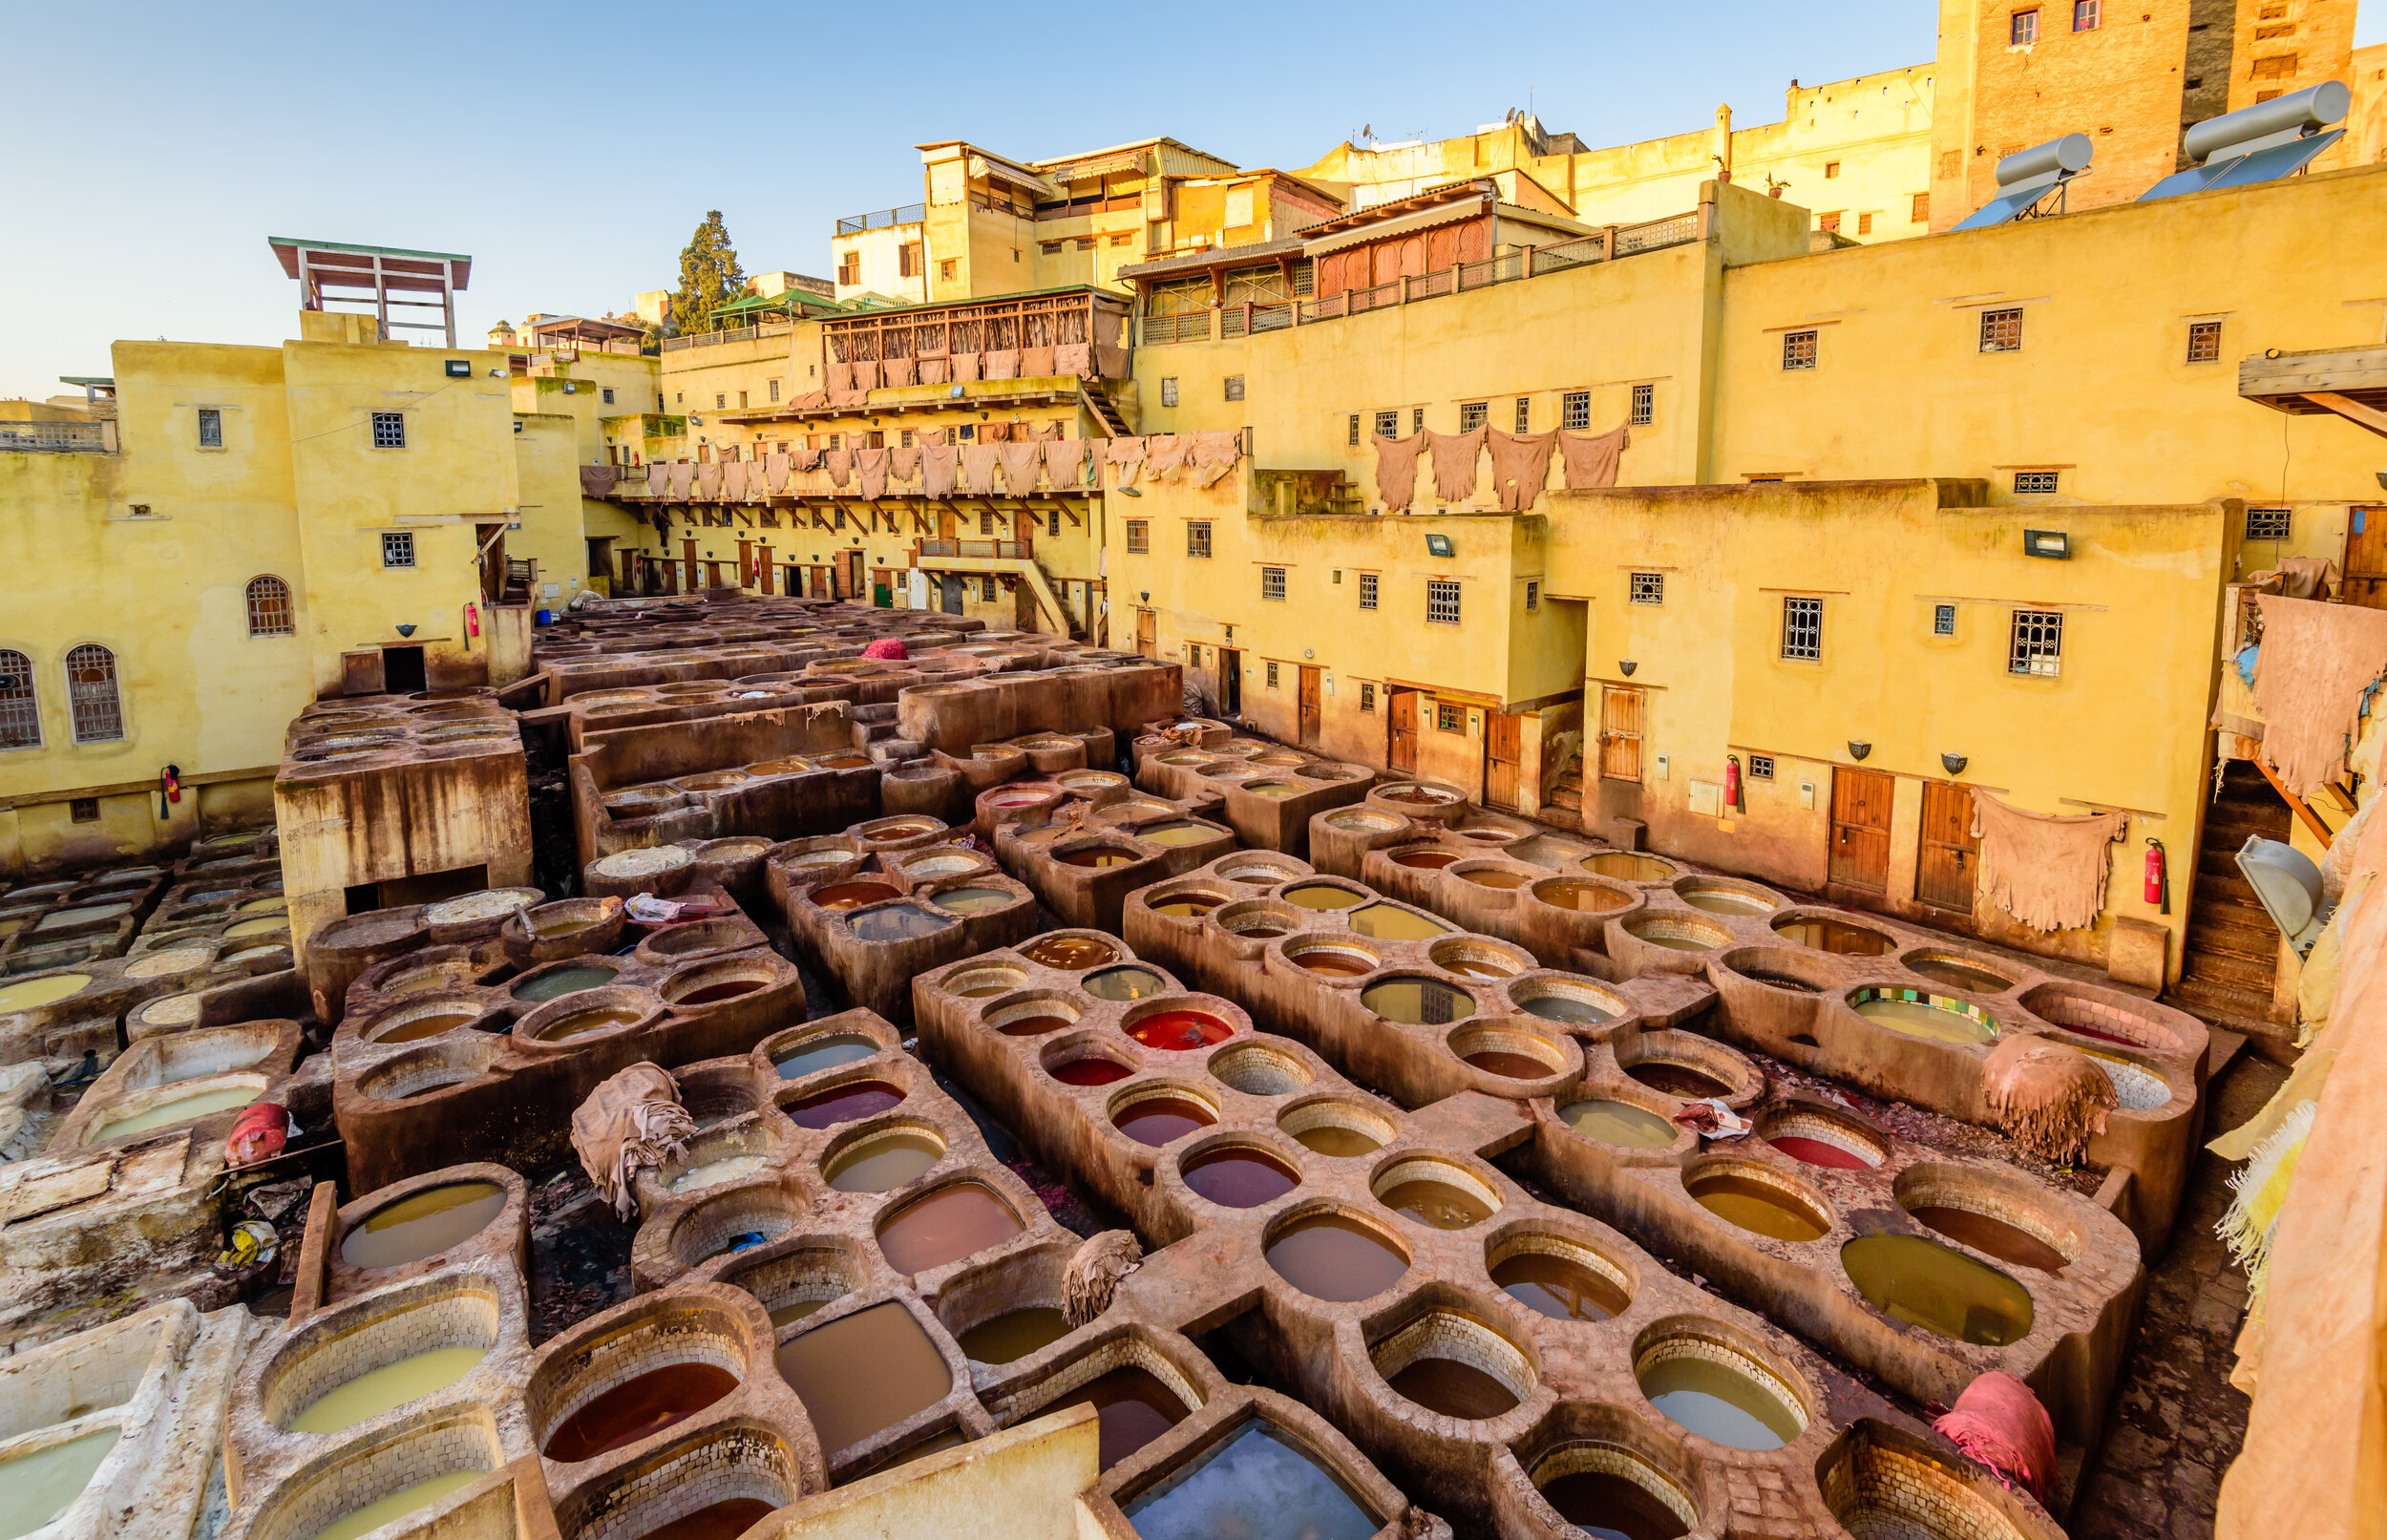  Dye reservoirs and vats in traditional tannery of city of Fez, Morocco 